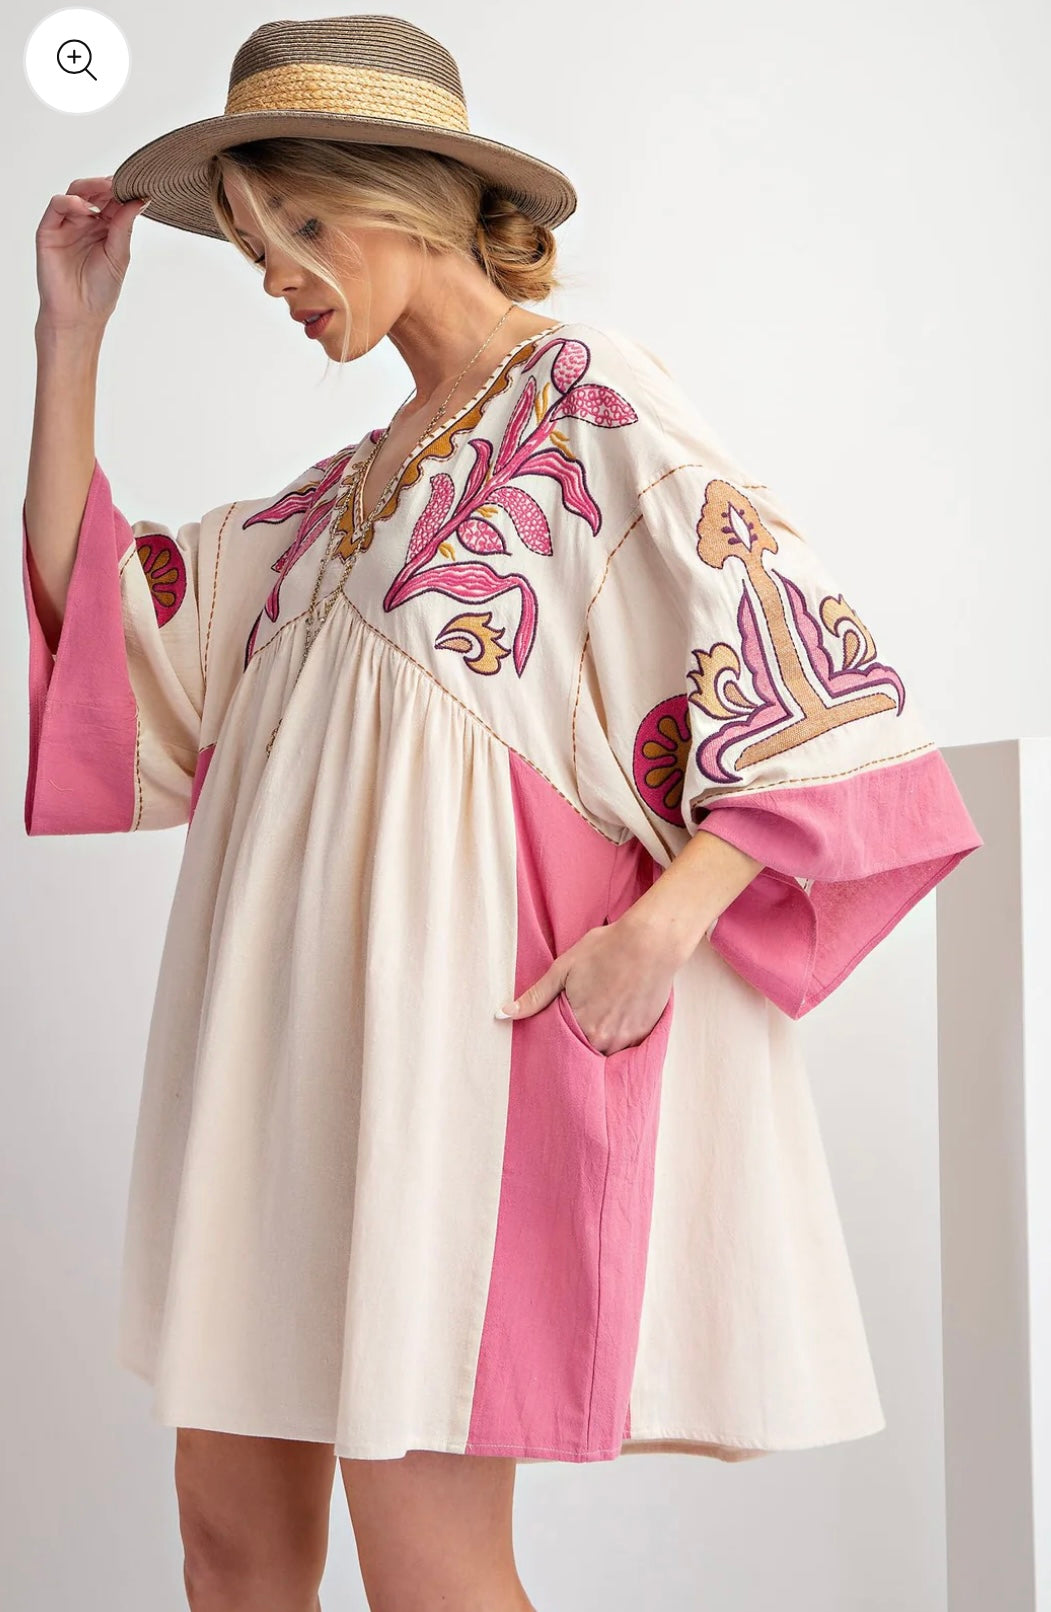 Easel embroidered tunic dress